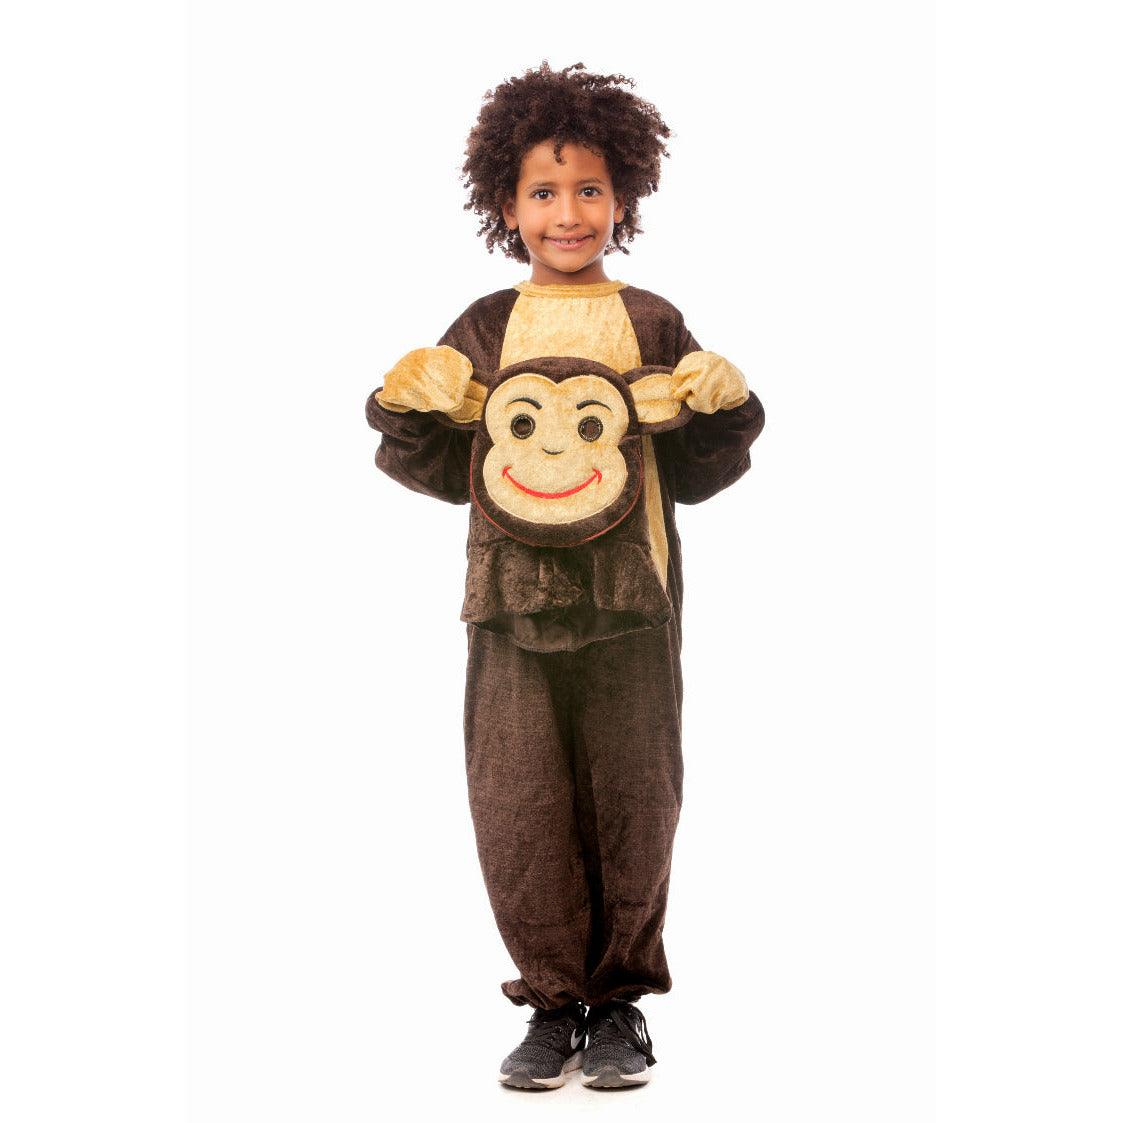 Monkey Costume - Ourkids - M&A